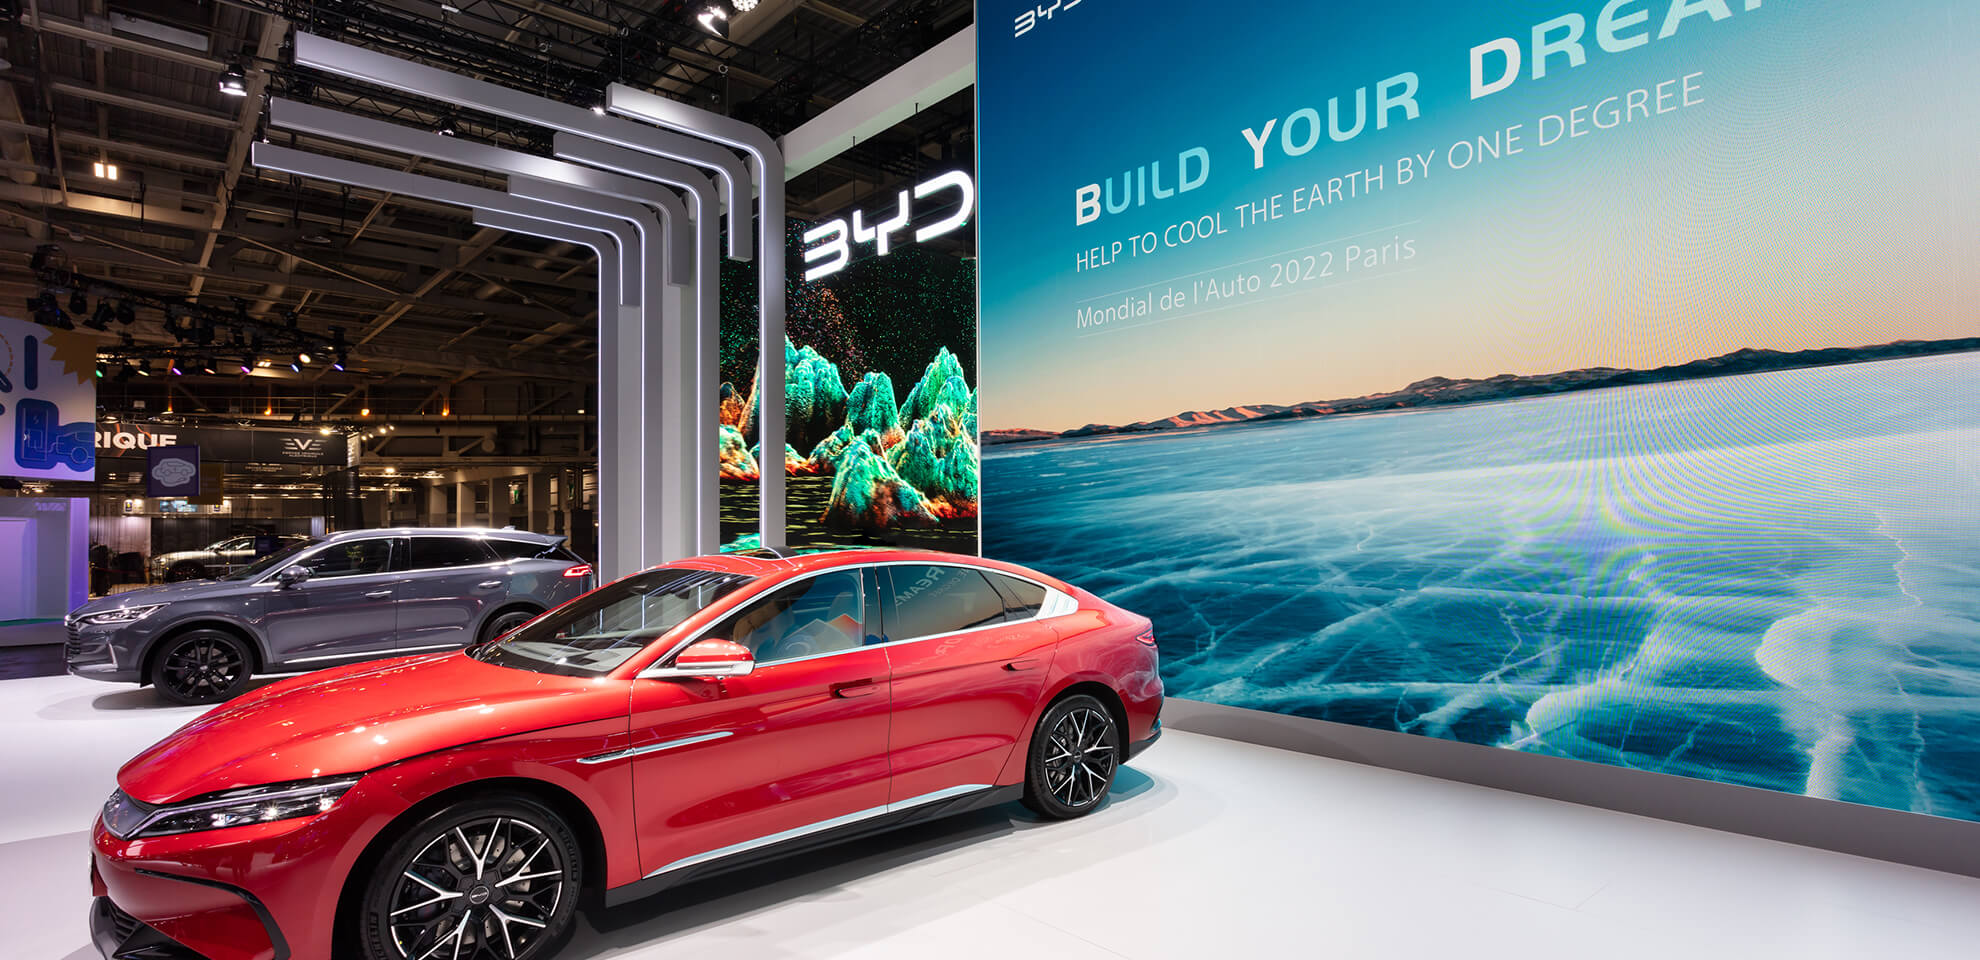 Display International builds modern exhibition stand for car manufacturers at Paris Motor Show 2022.